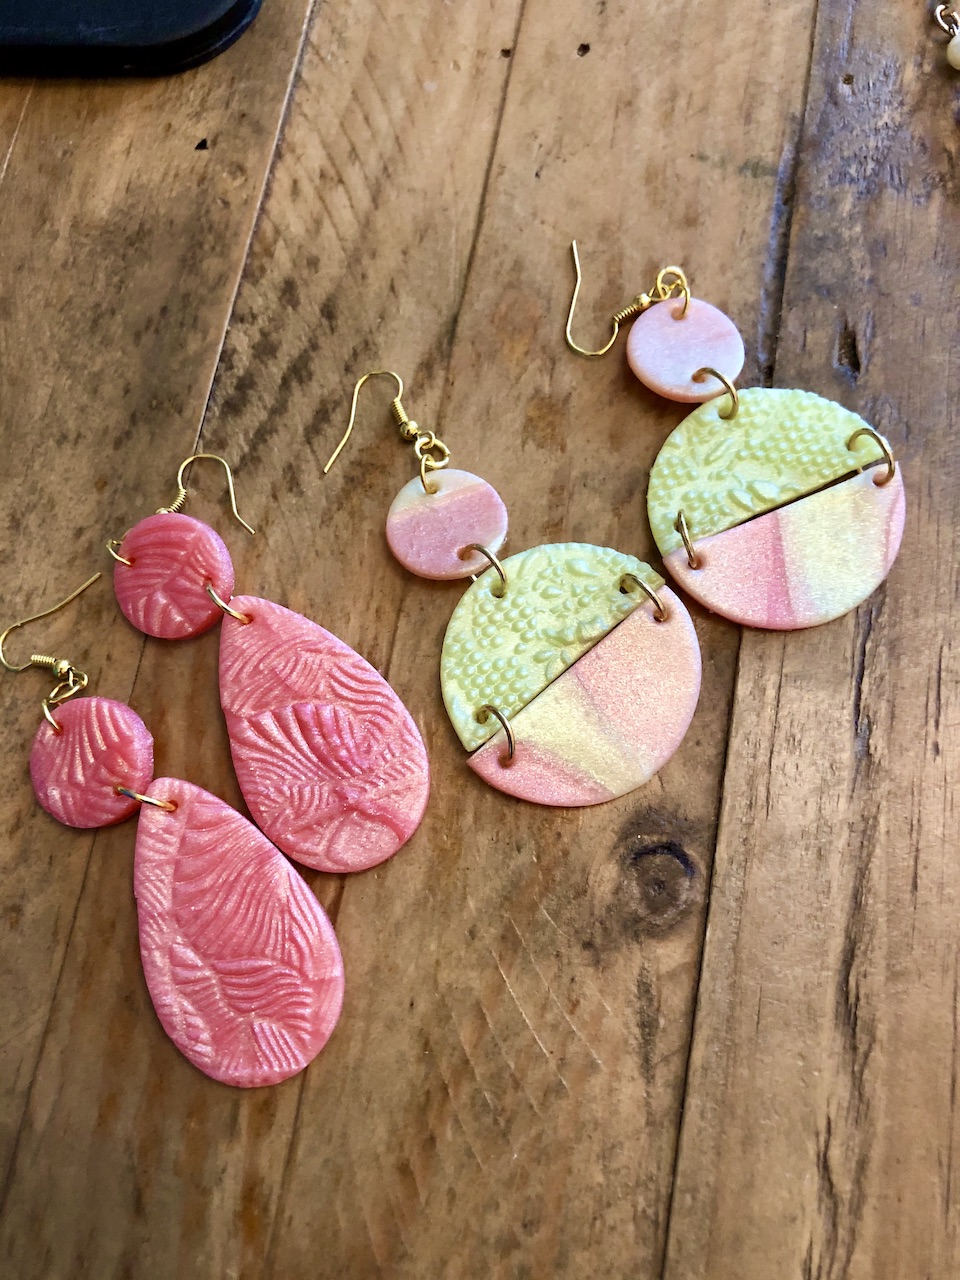 10 Polymer Clay Jewelry Projects To Make With Sculpey Premo Iridescent